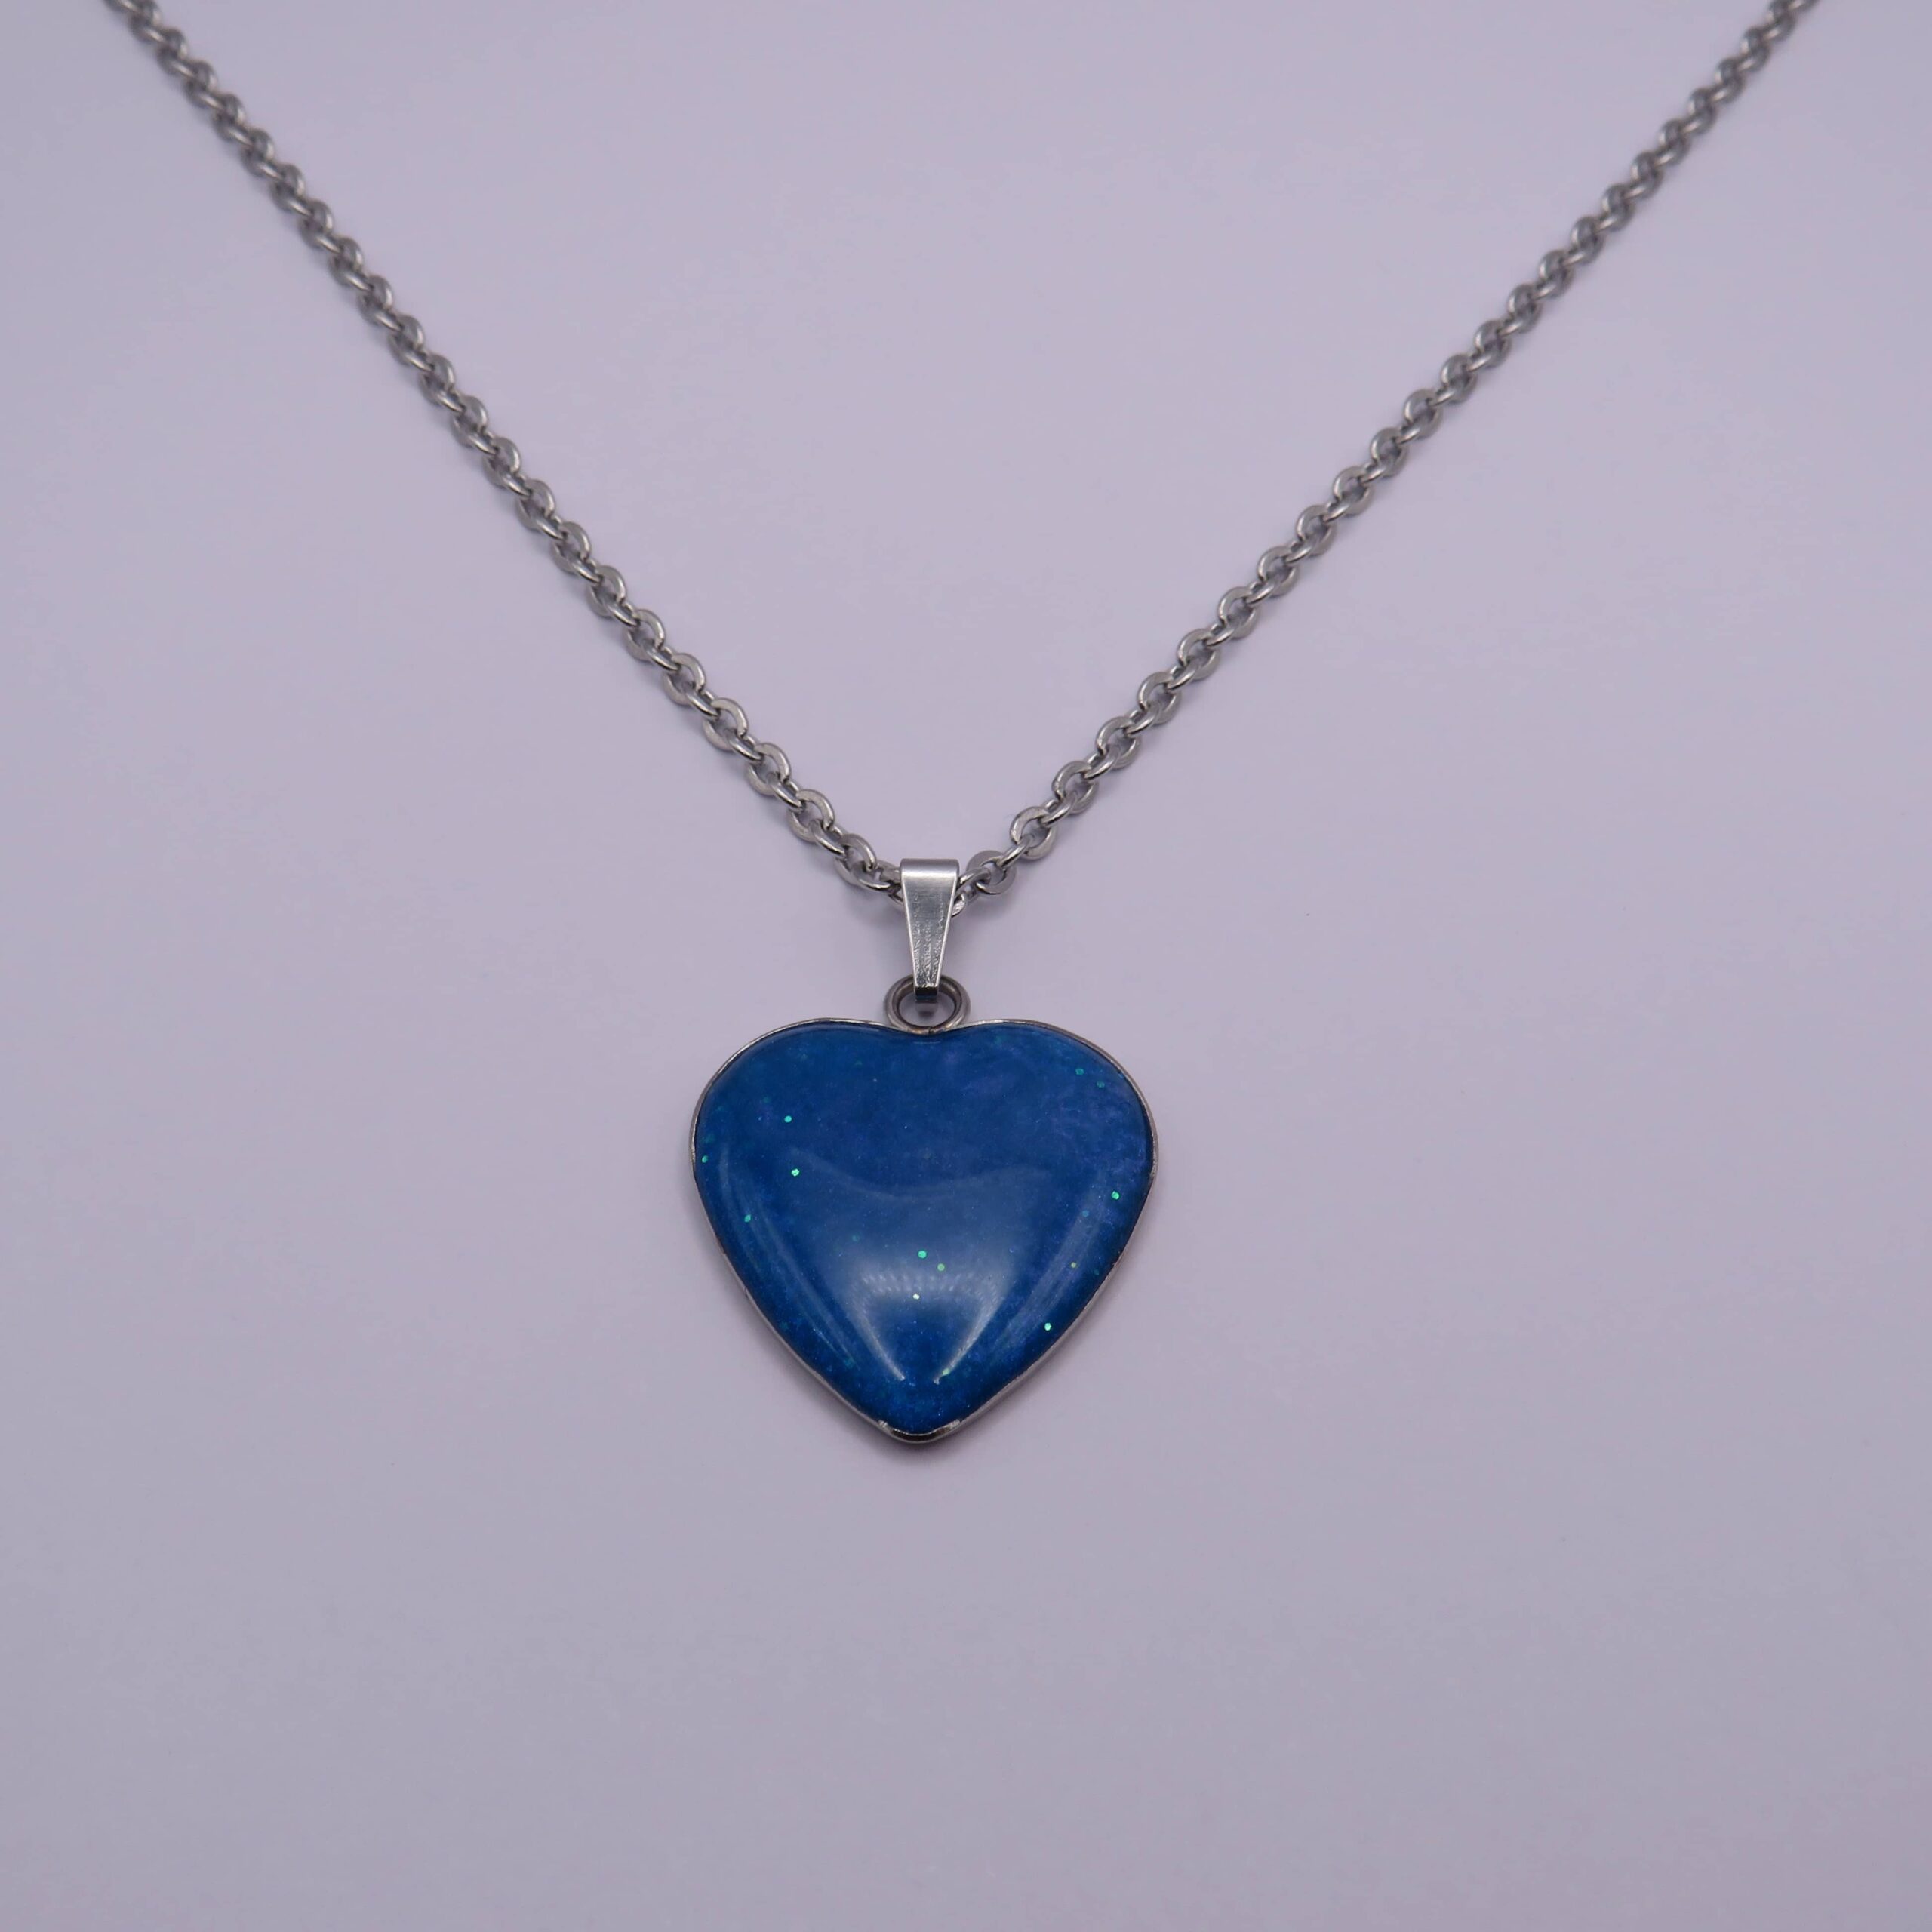 Stainless Steel Blue Glitter Cabochon Heart Pendant Necklace